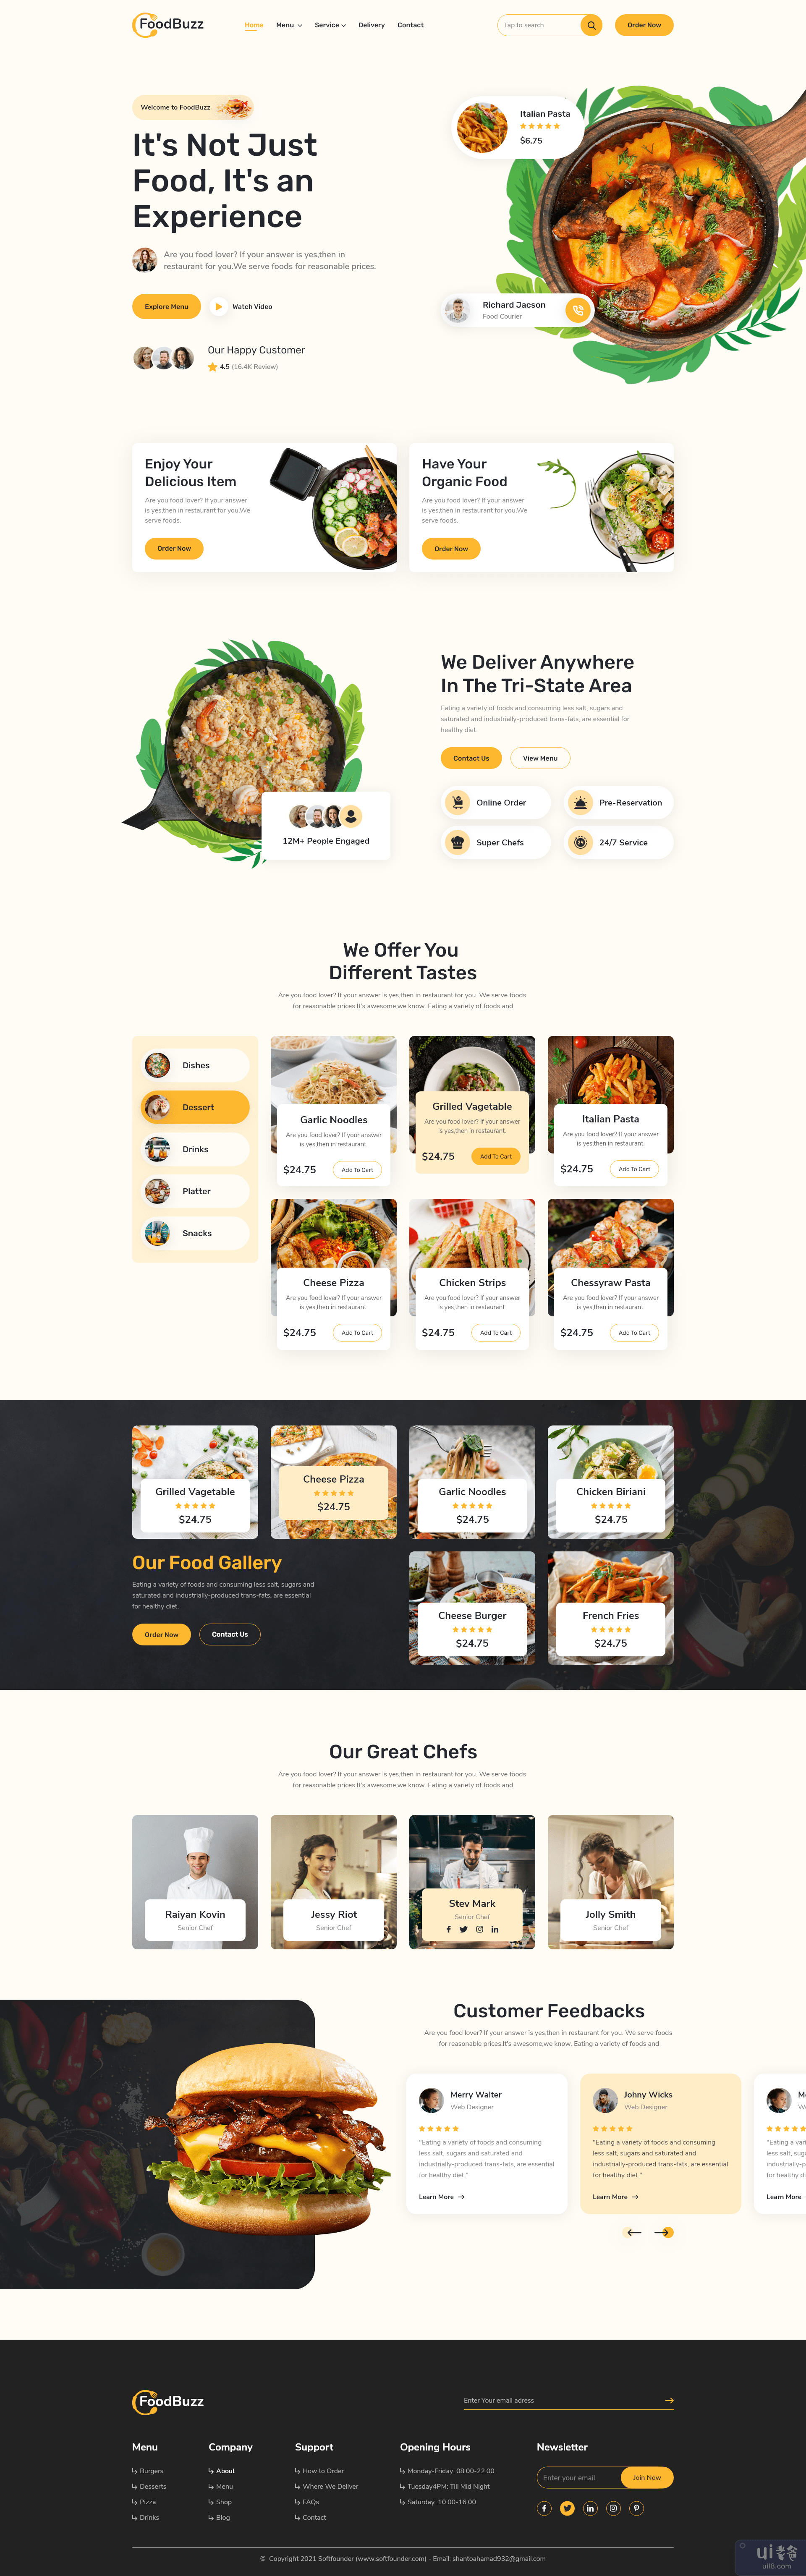 FoodBuzz（送餐登陆页面）(FoodBuzz (Food Delivery Landing Page))插图1